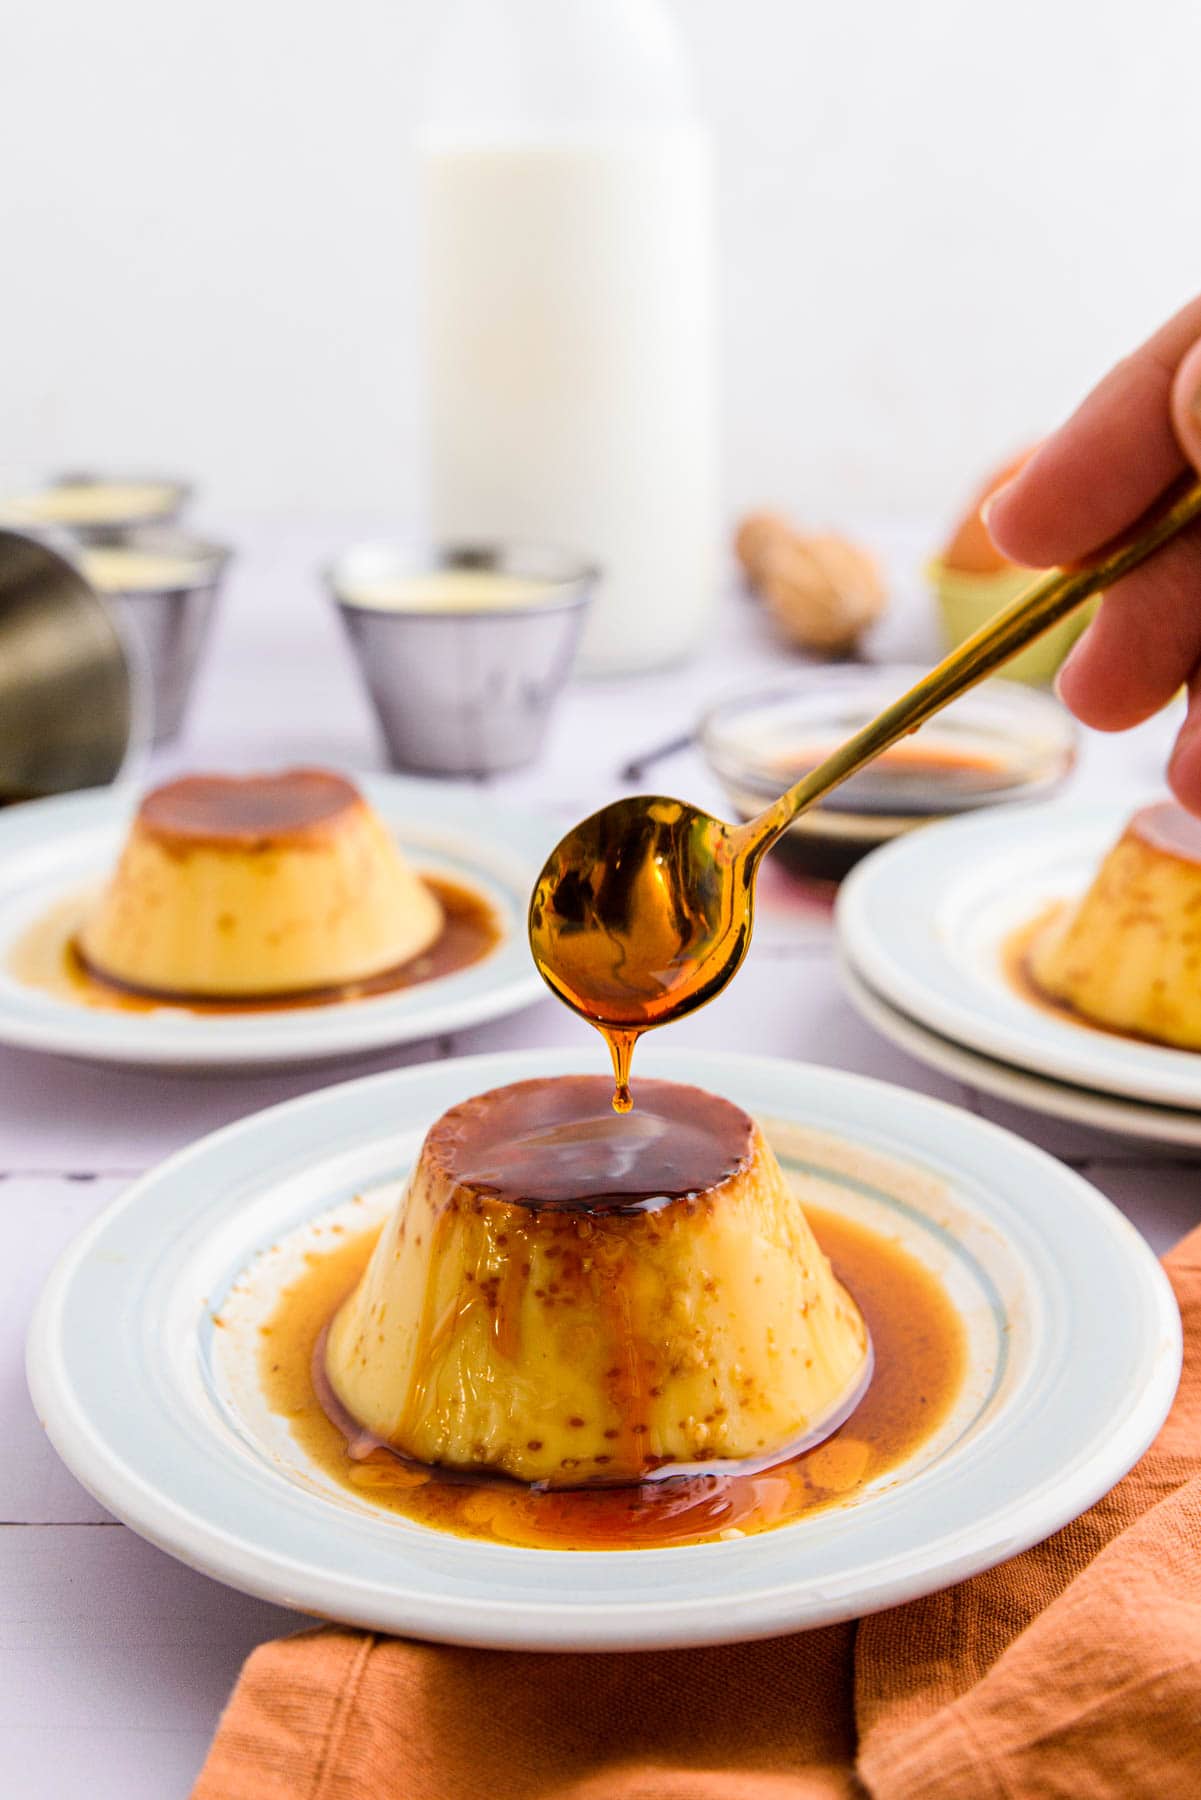 silver spoon drizzling caramel sauce on spanish flan on white plate with stuff on table behind.